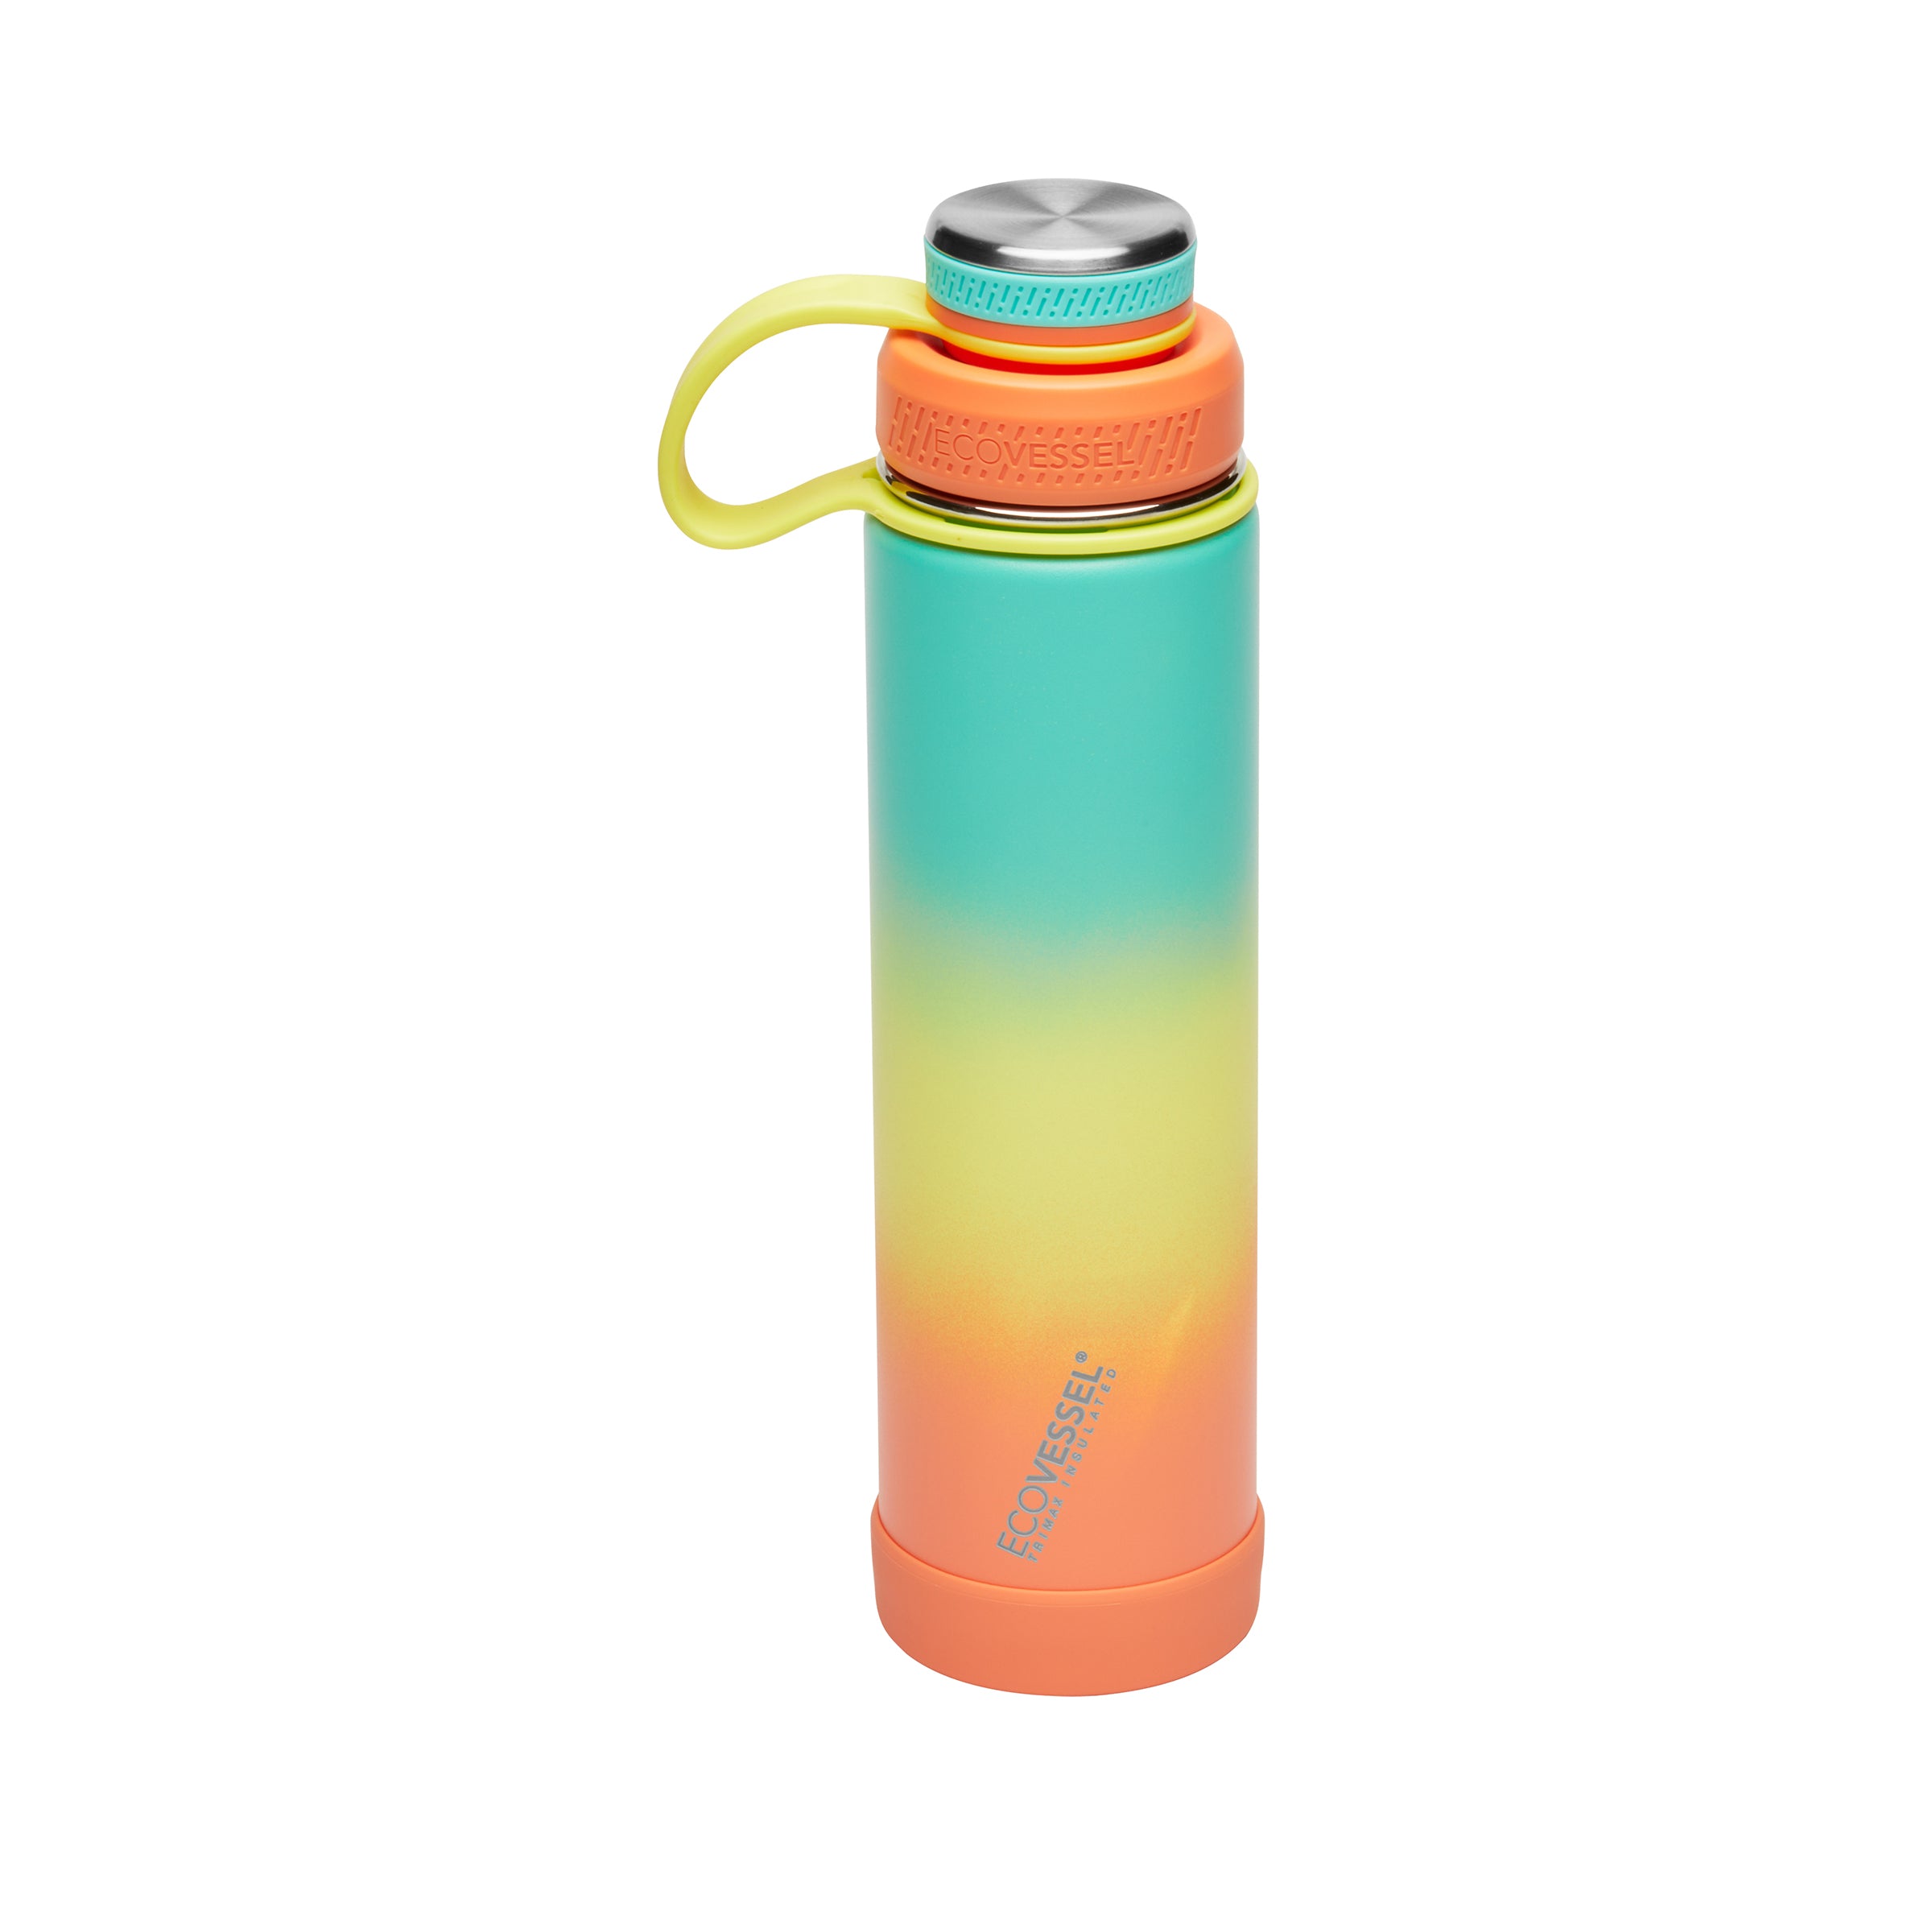 THE BOULDER Insulated Water Bottle with Strainer - 24 oz Aqua Breeze